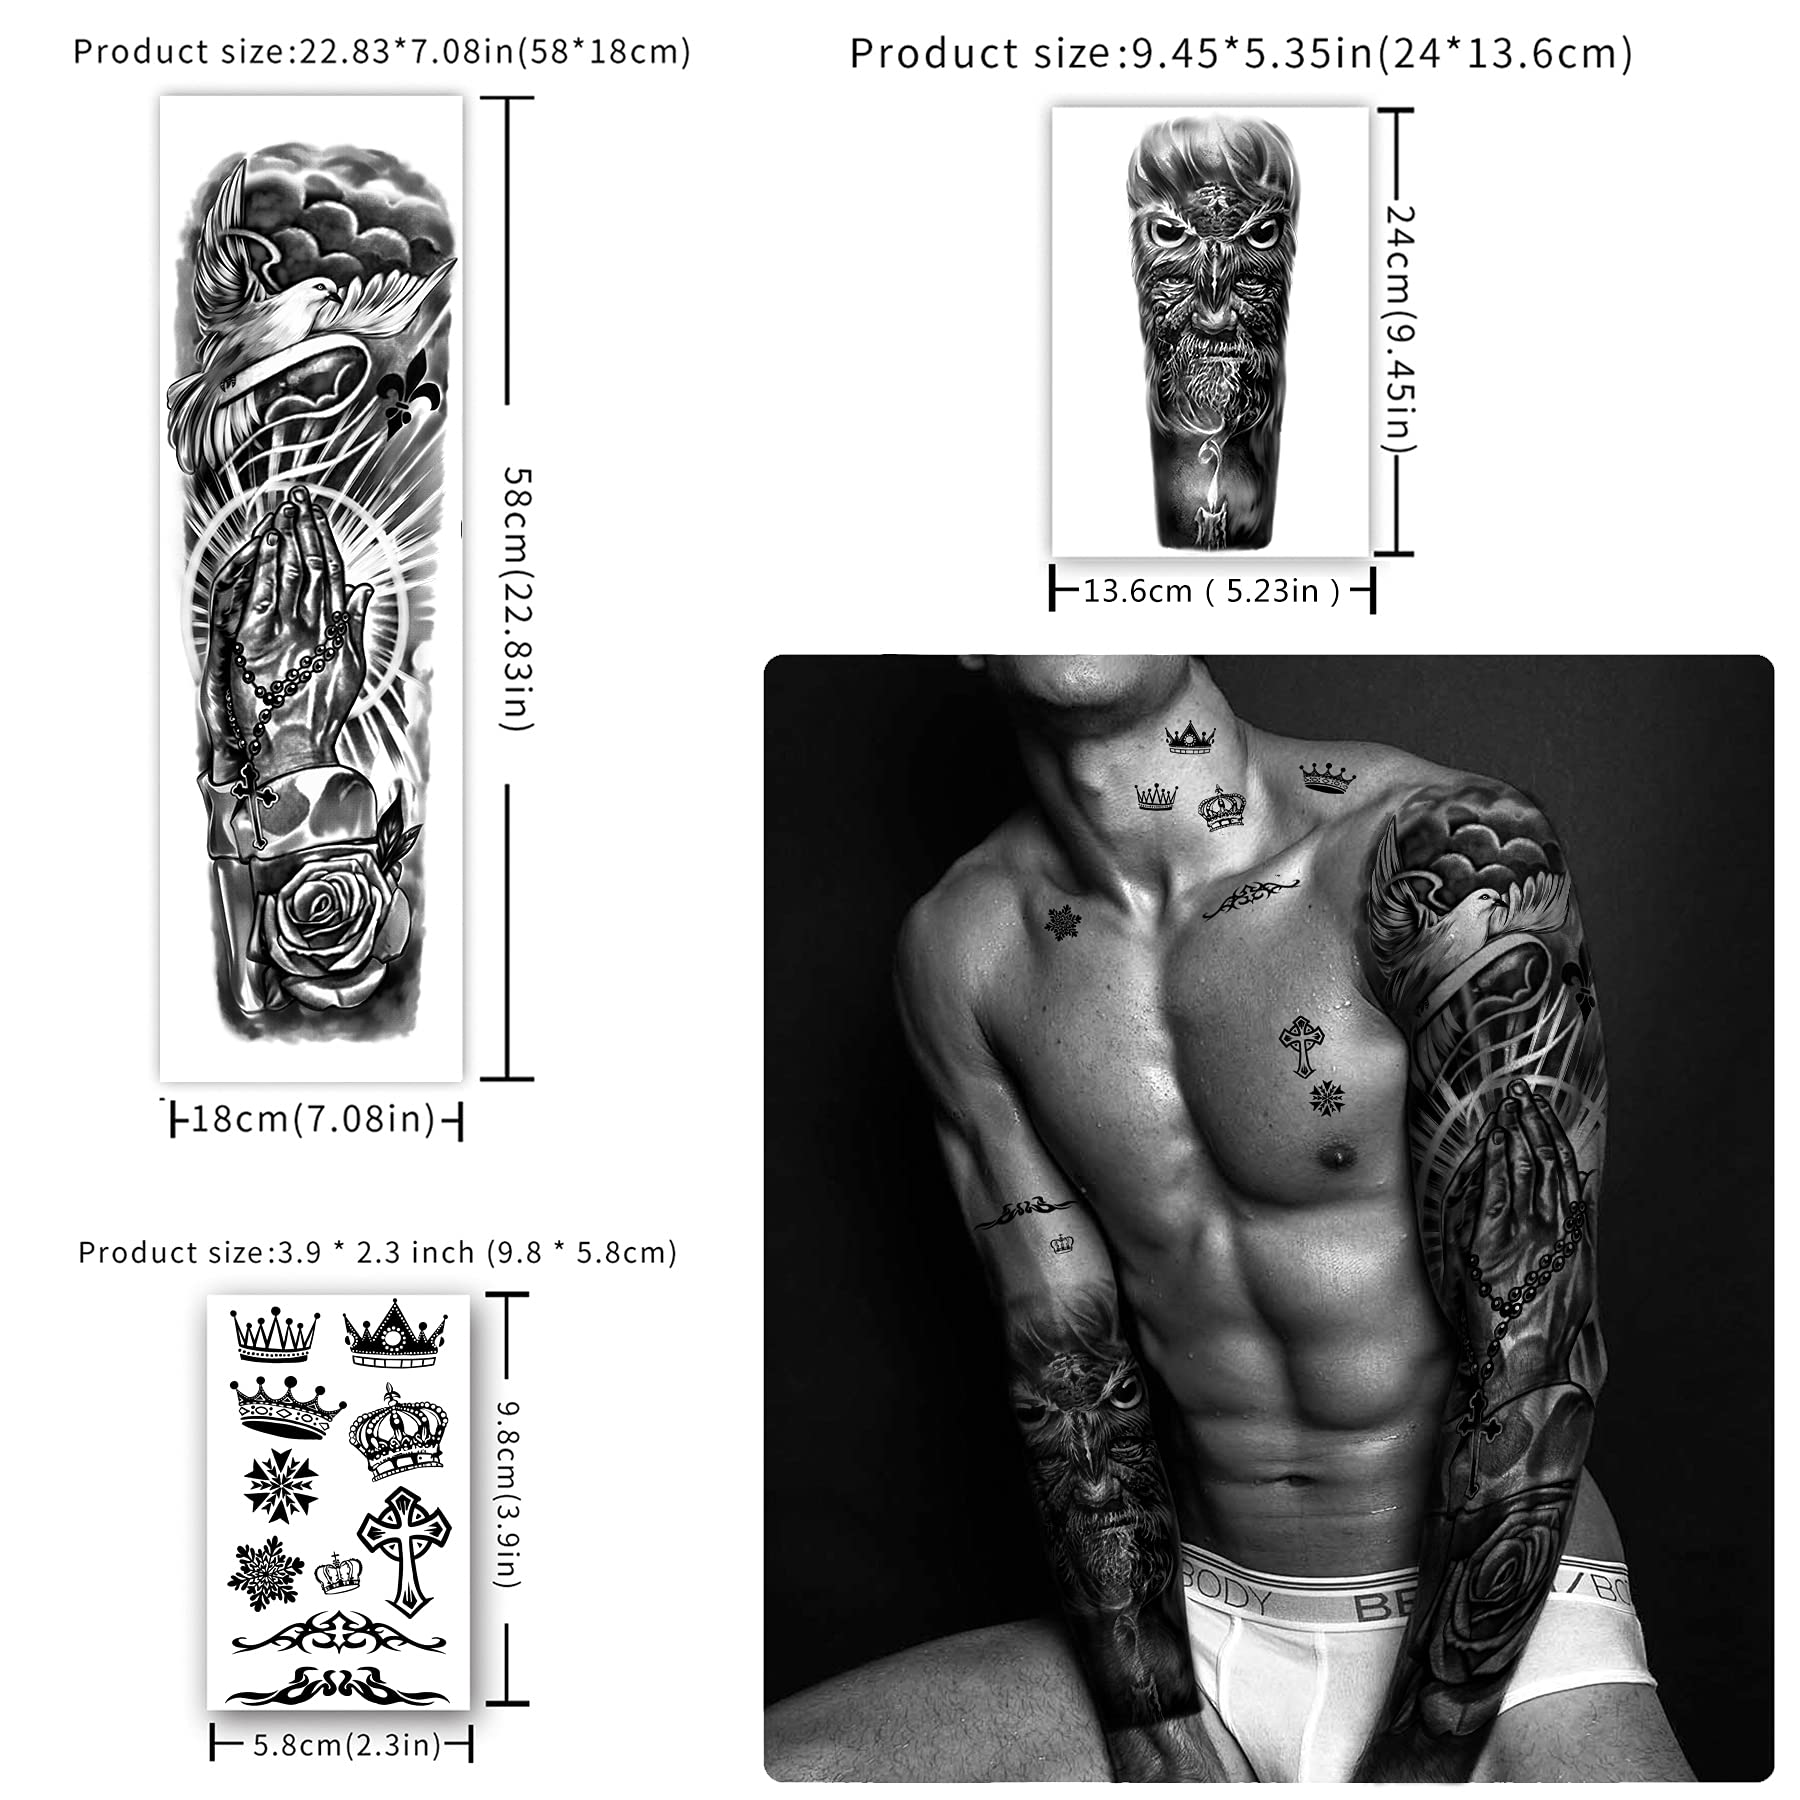 Amazon.com : Metuu 46 Sheets Full Arm Temporary Tattoos For Men and  Women(L22.8”xW7”), Lion Dragon Clock Flower Skeleton Scorpion Tattoos for  Teens, Forearm Shoulder Temp Waterproof Fake Tattoo Stickers : Beauty &